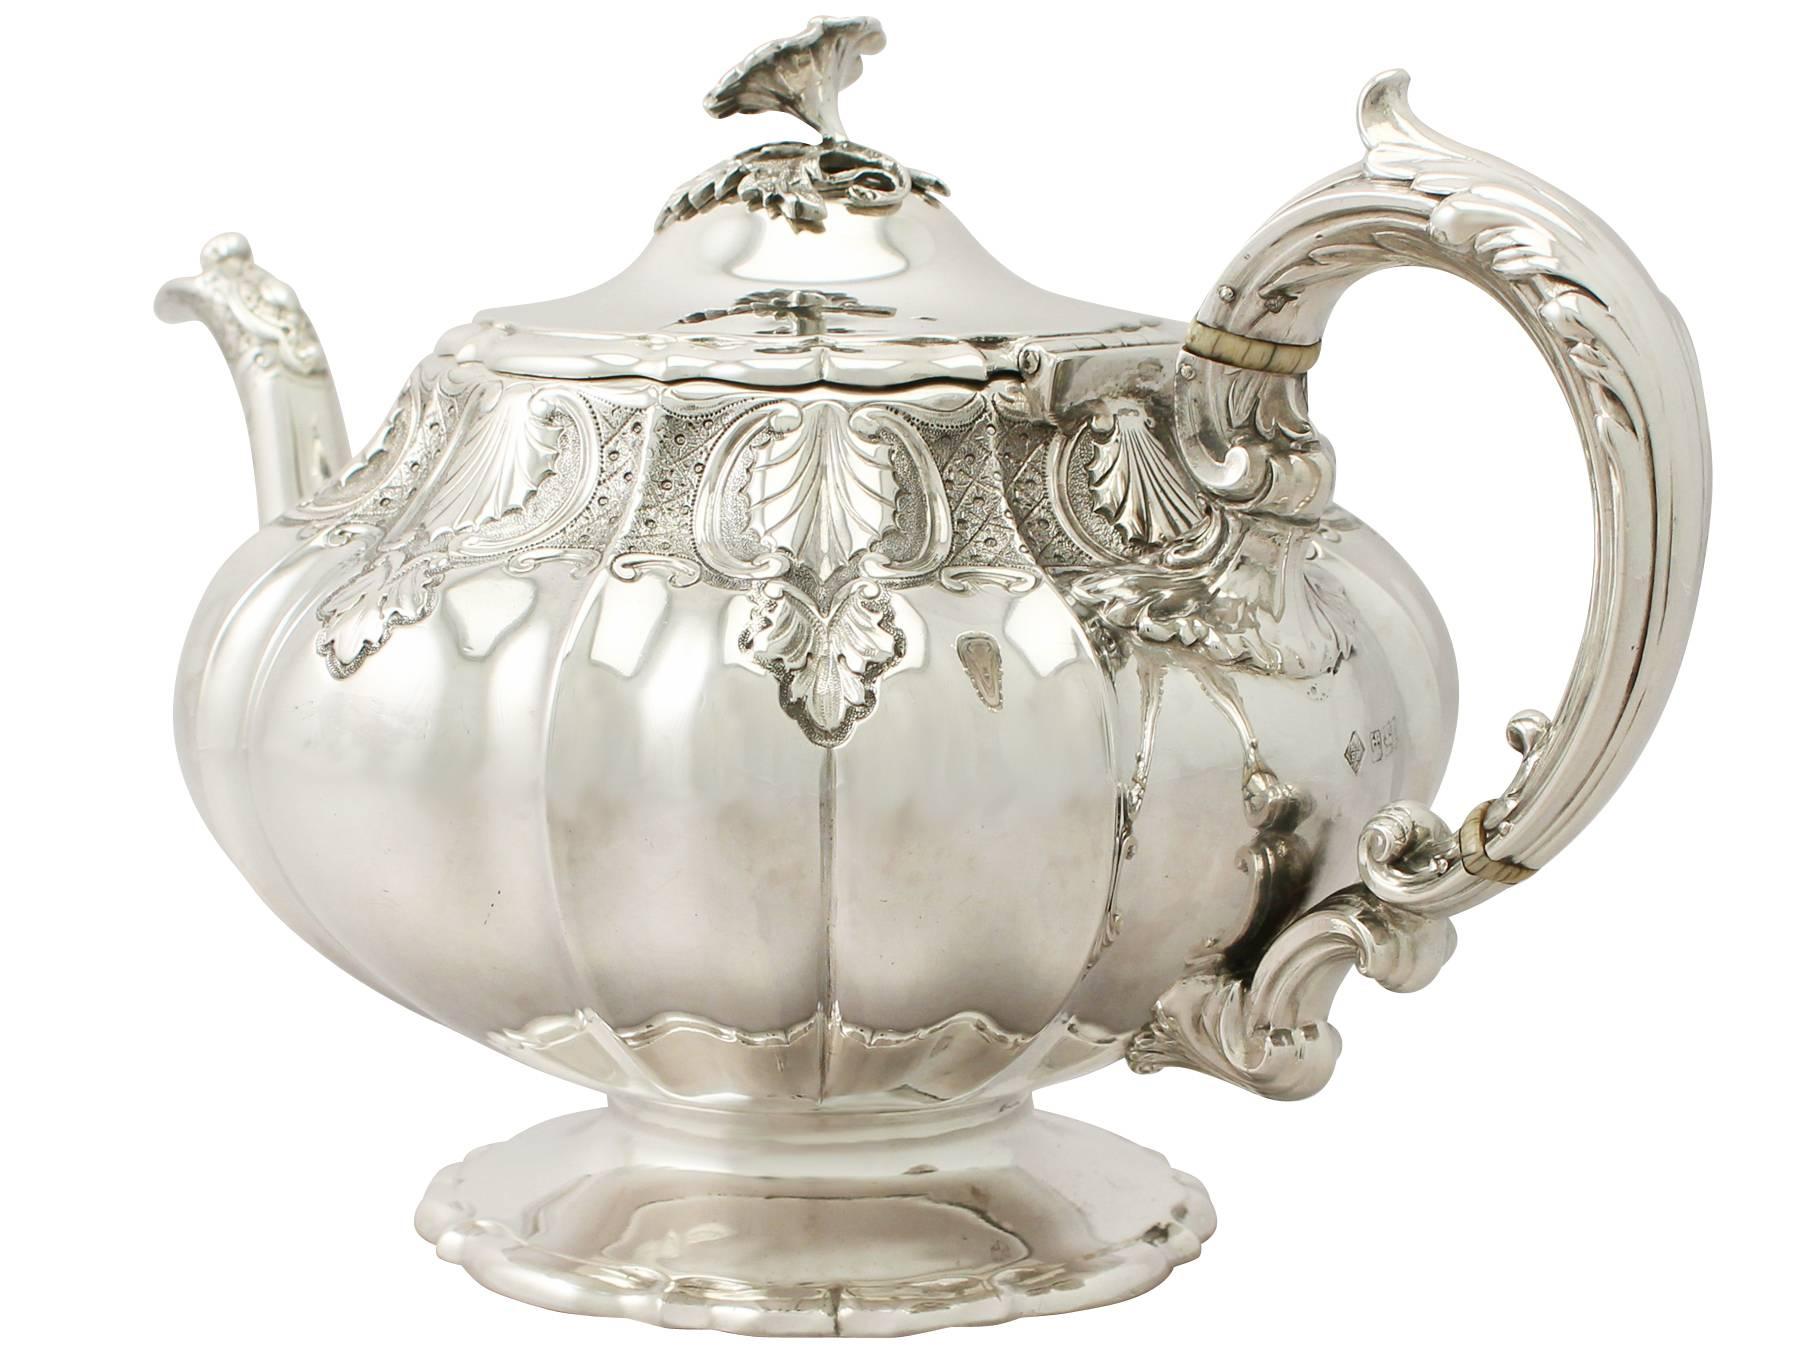 English Sterling Silver Teapot, Antique Victorian